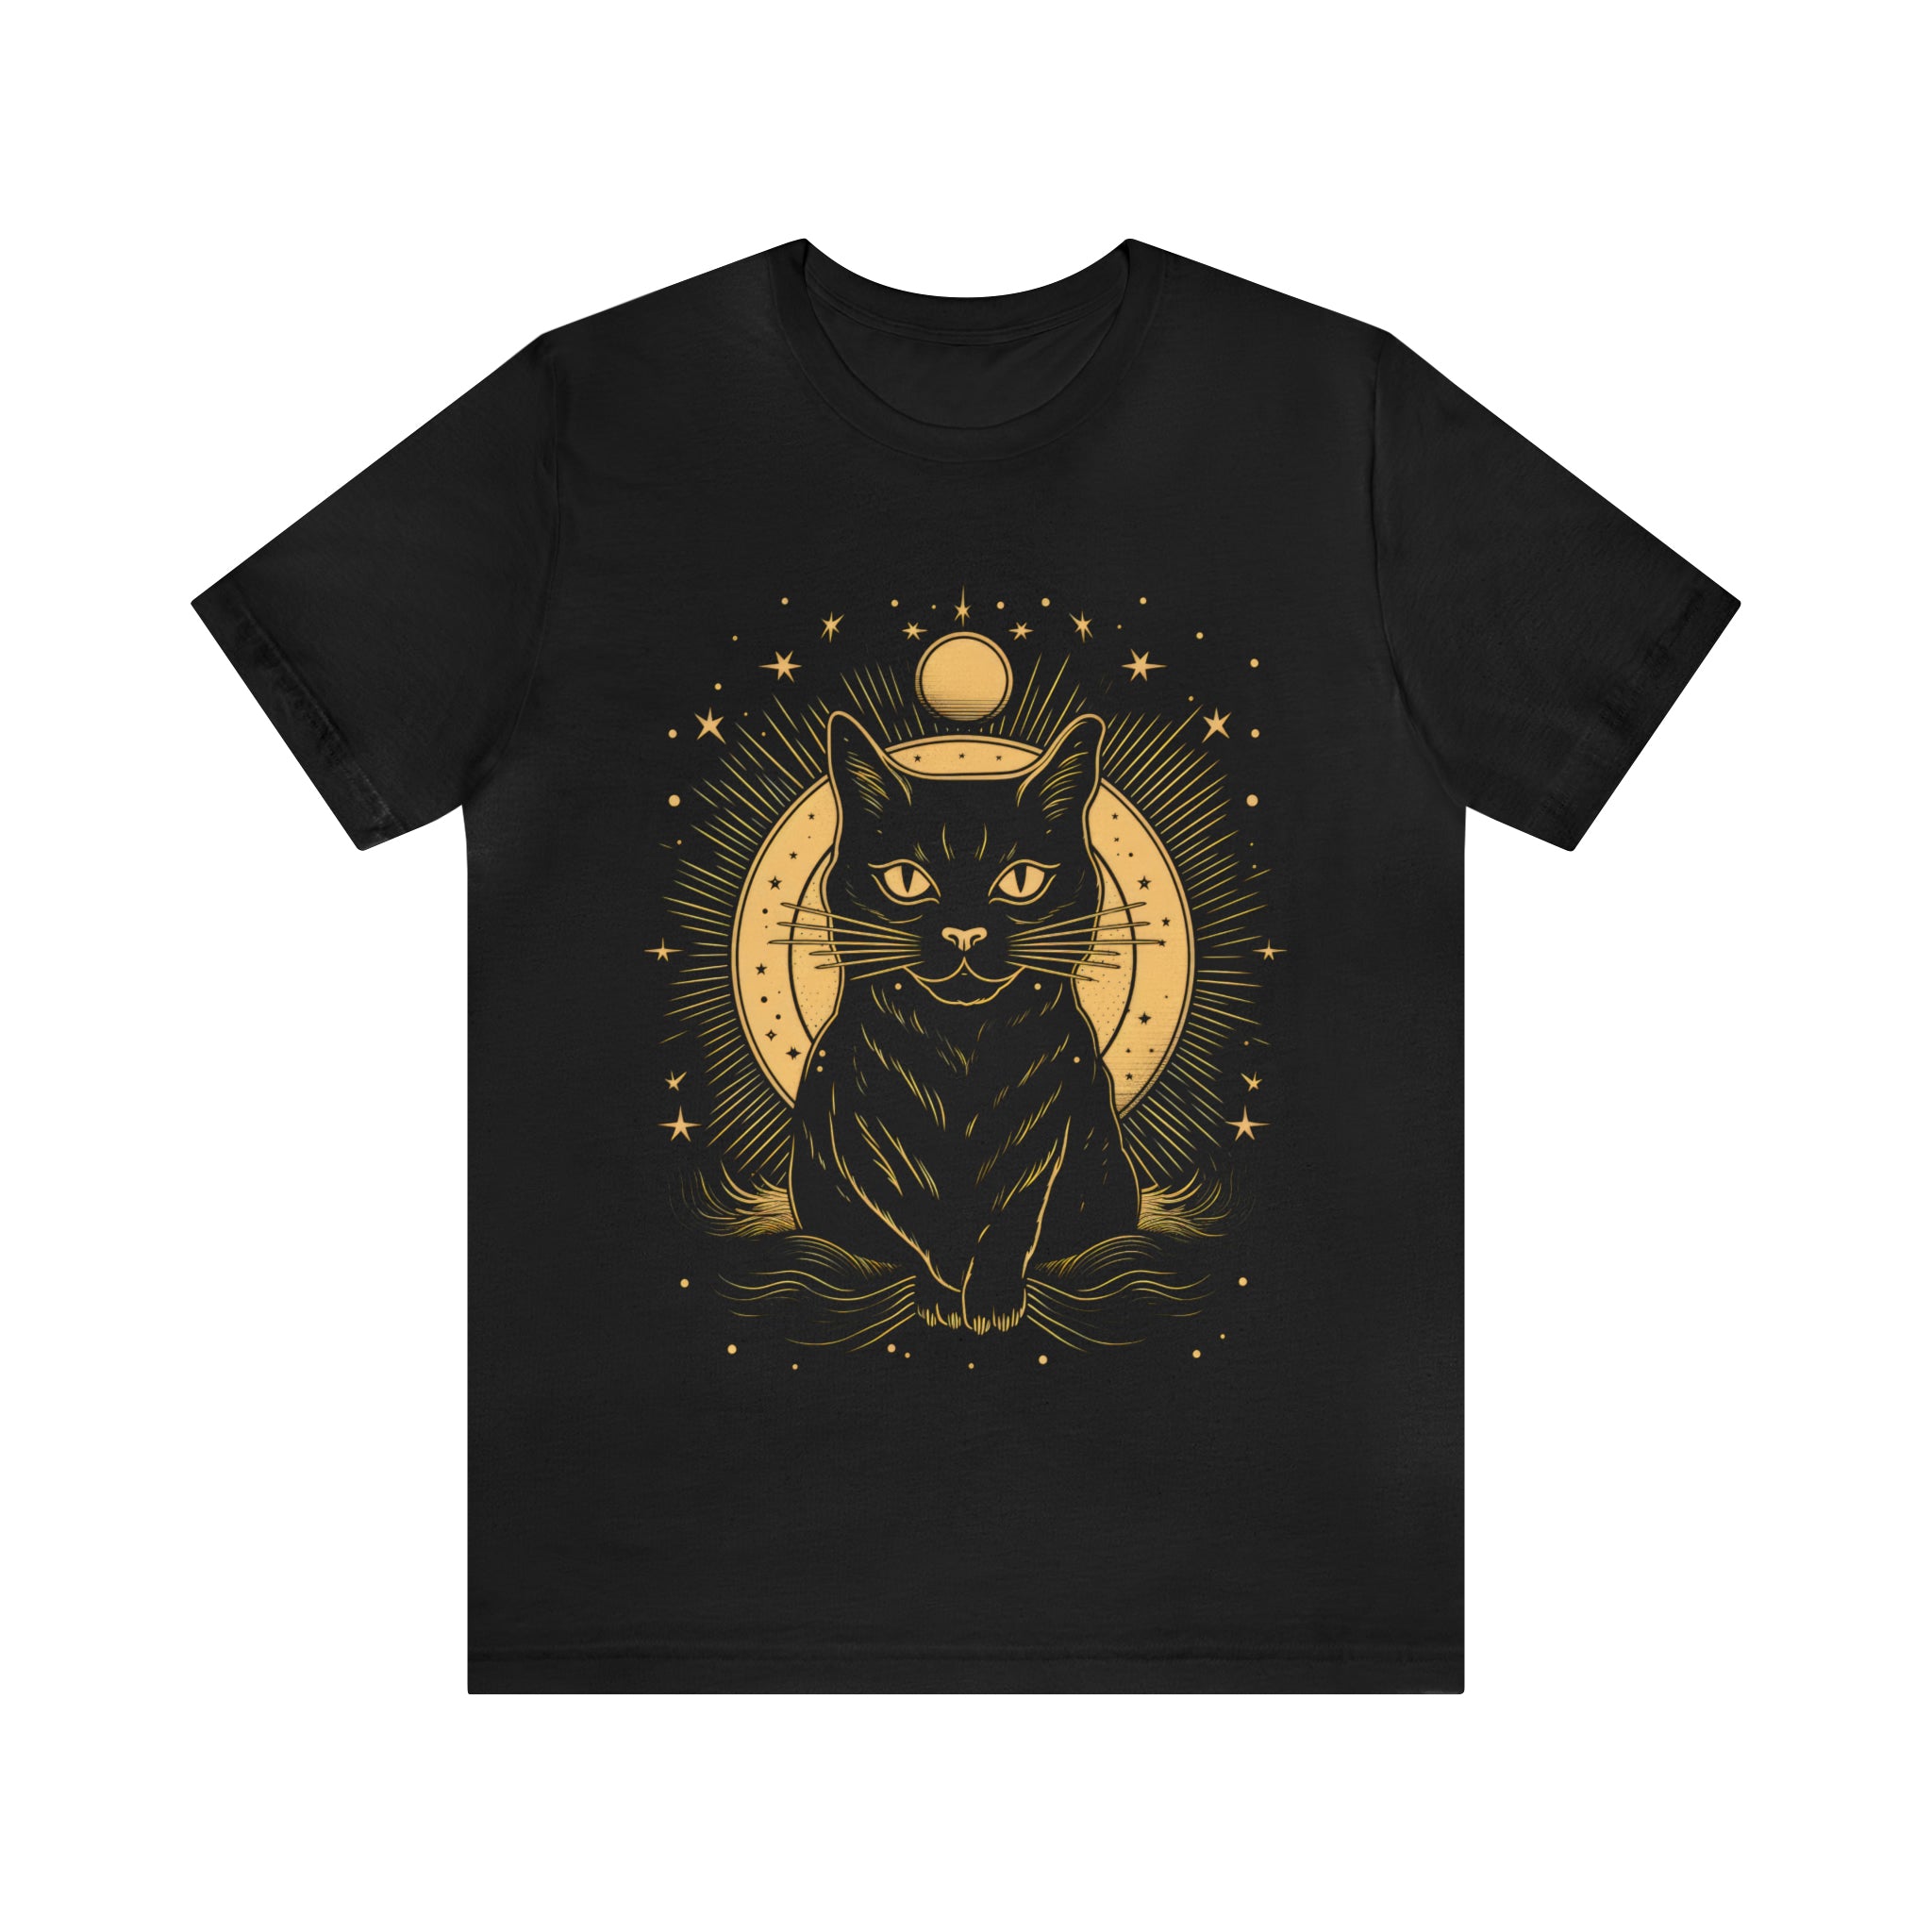 Cosmic kitty cat t-shirt front